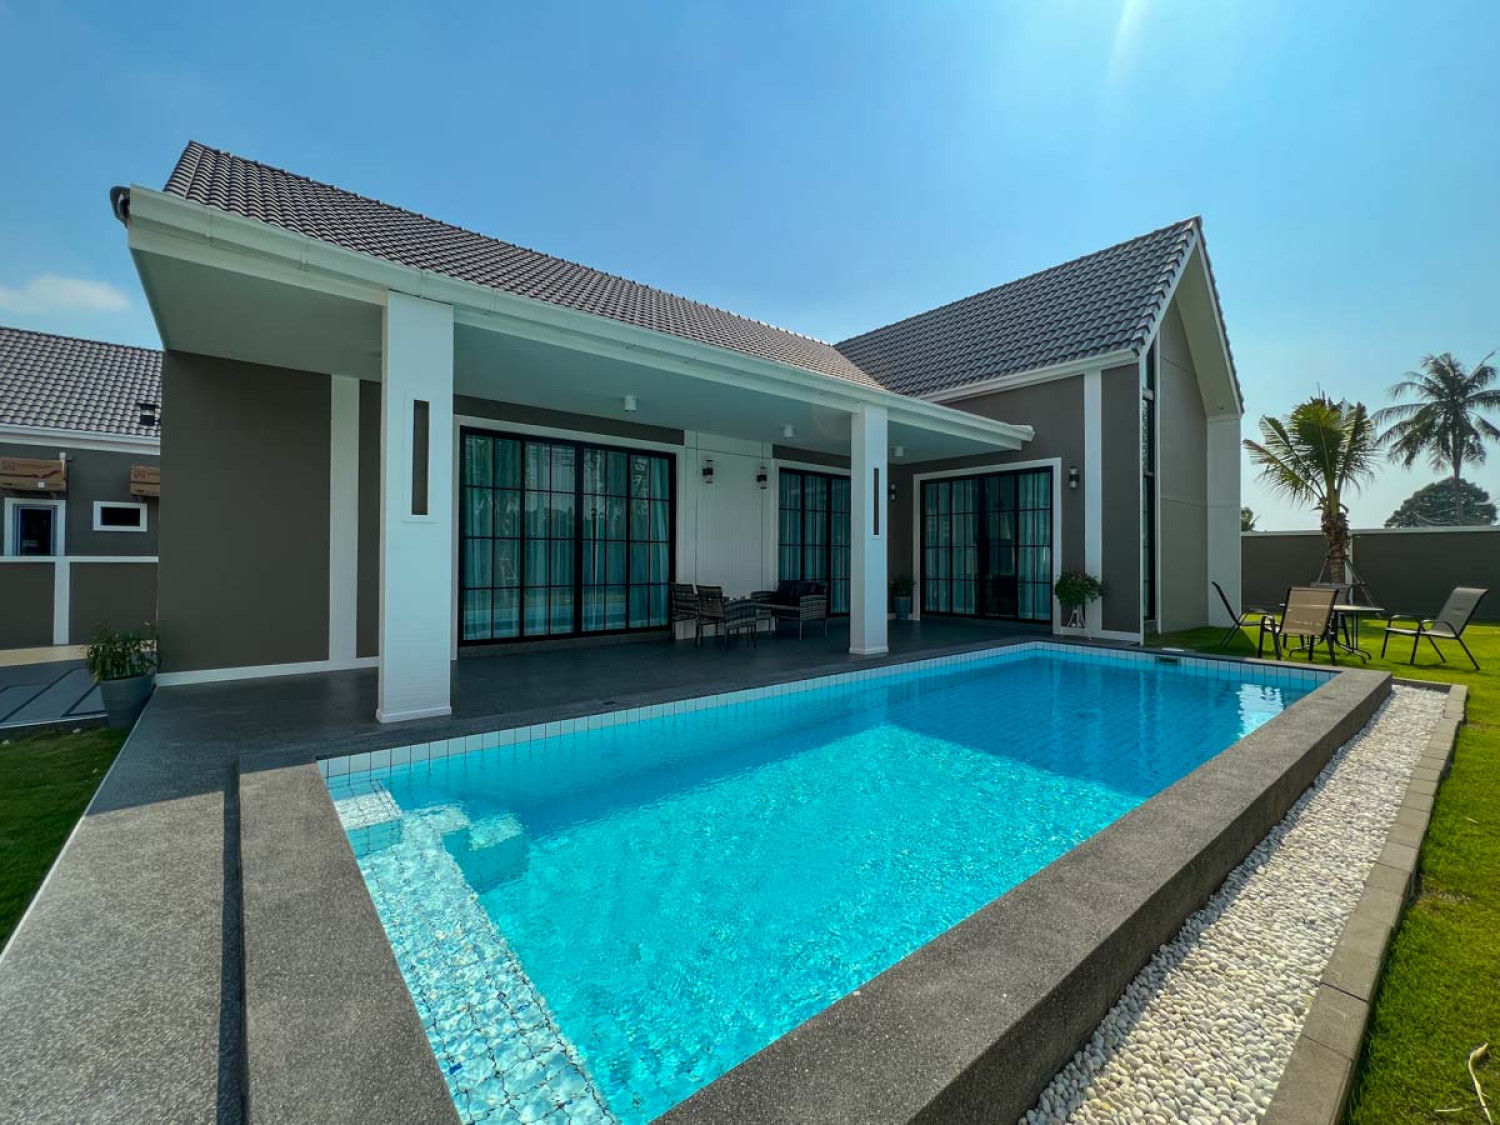 Nordic Style House for Sale in East Pattaya - 3bed 4 bath image 1